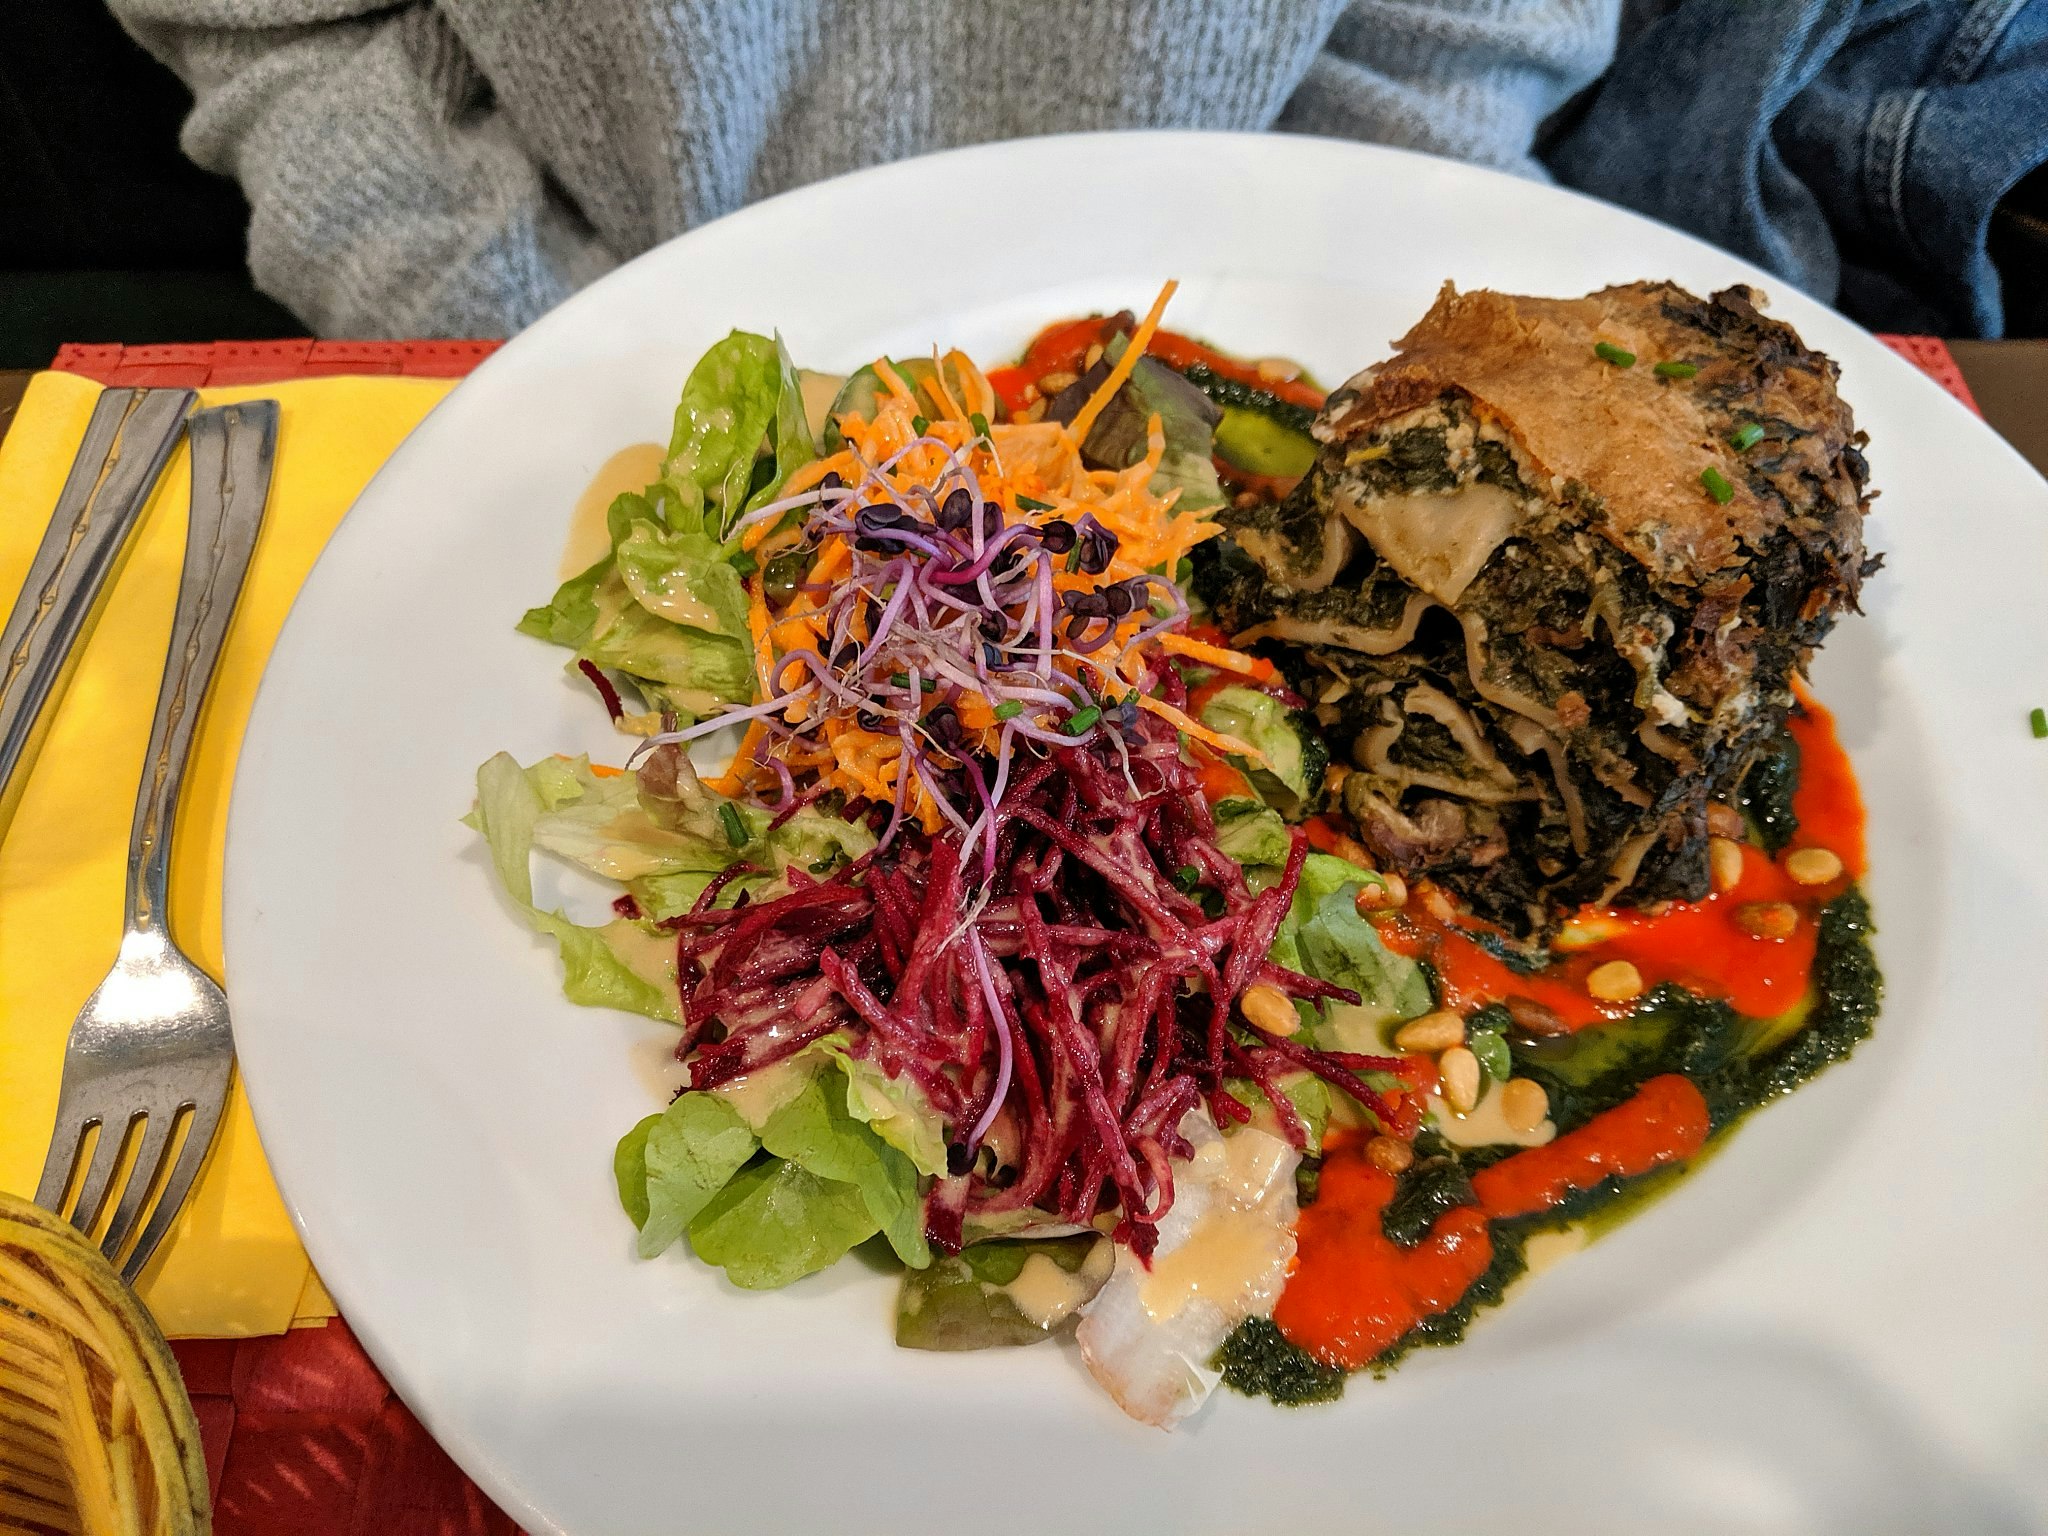 A veggie lasagne on a white plate with a colourful salad.